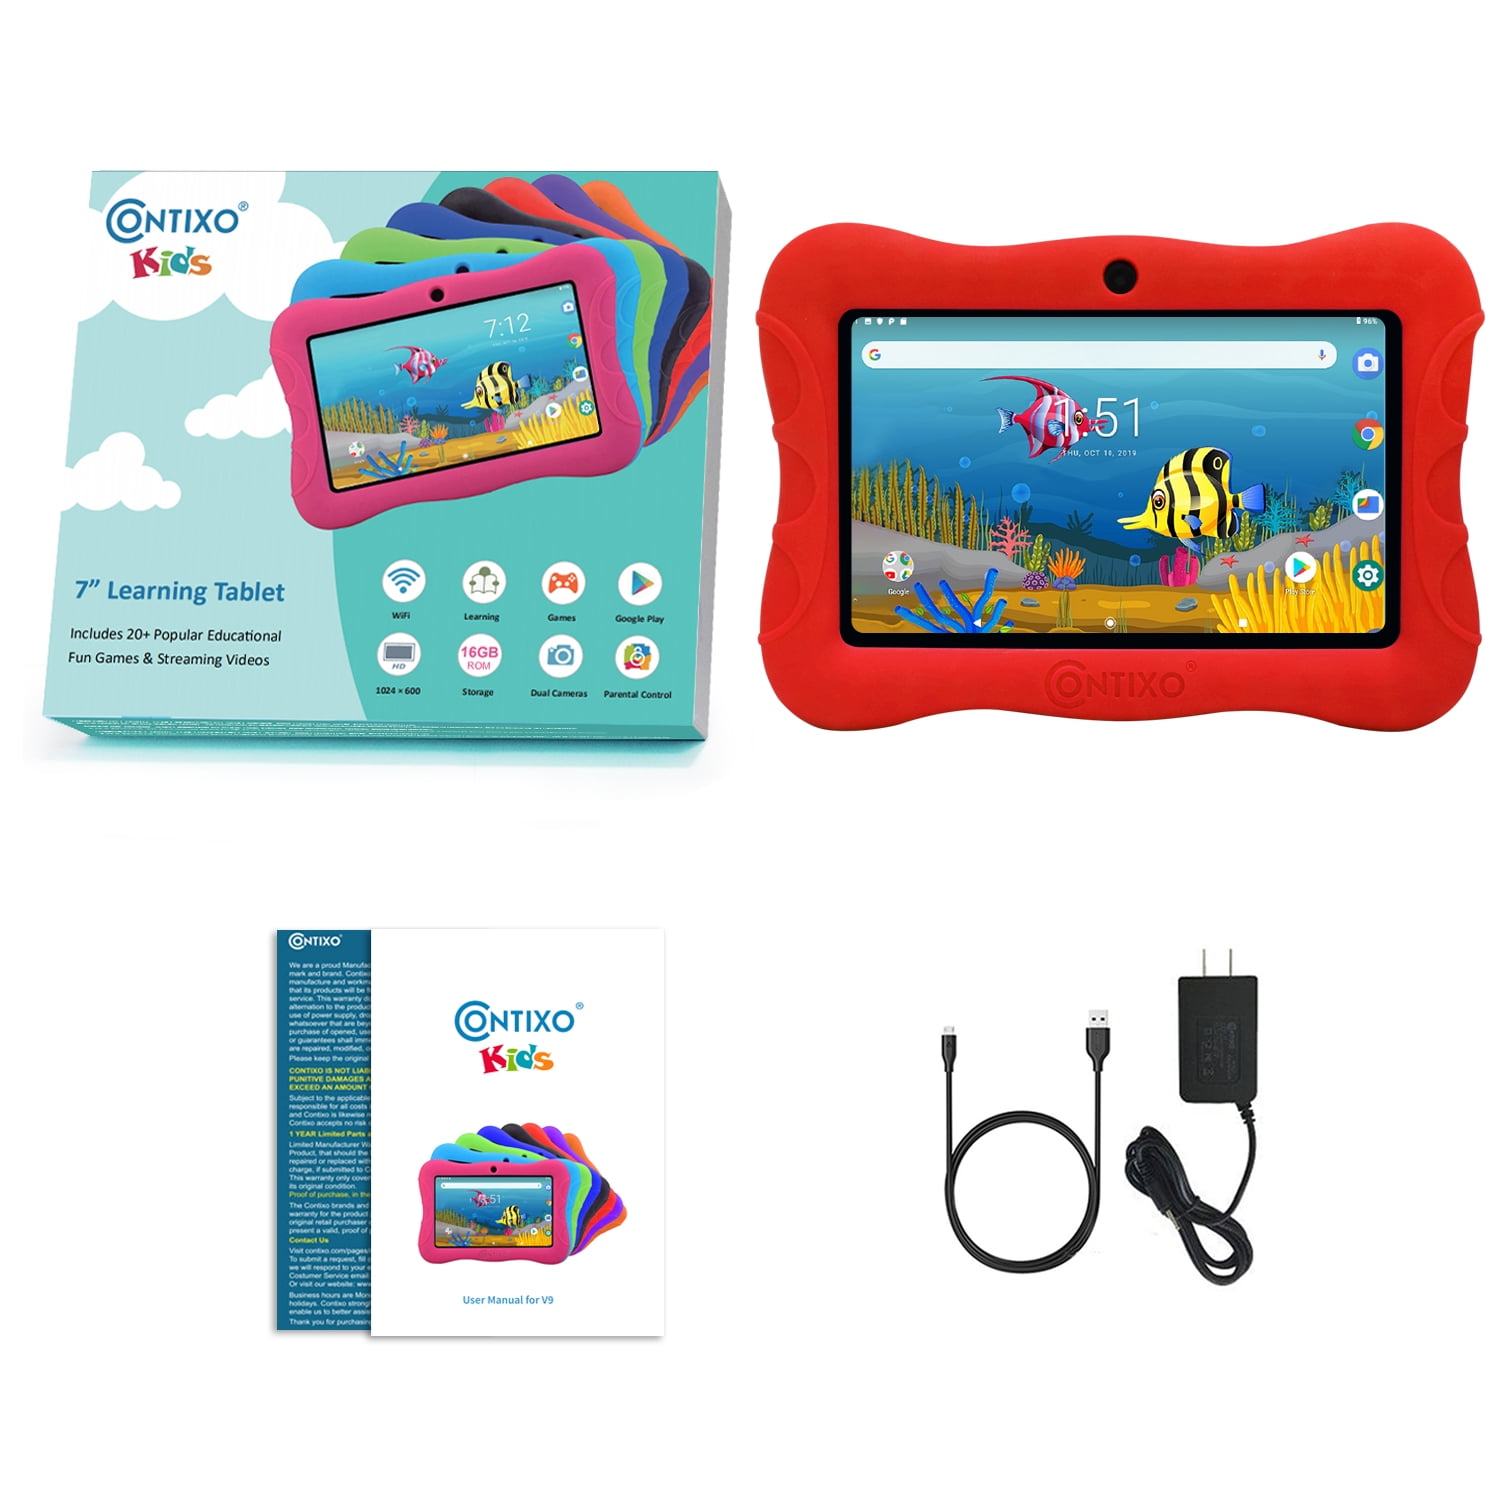 Educational Tablets for Kids Android 10 Tablet Purple 2GB RAM 32 GB ROM Parental Control Pre Installed Learning Game Apps WiFi Bluetooth Tablets for Kids Contixo V9-3-32 7 Inch Kids Tablet